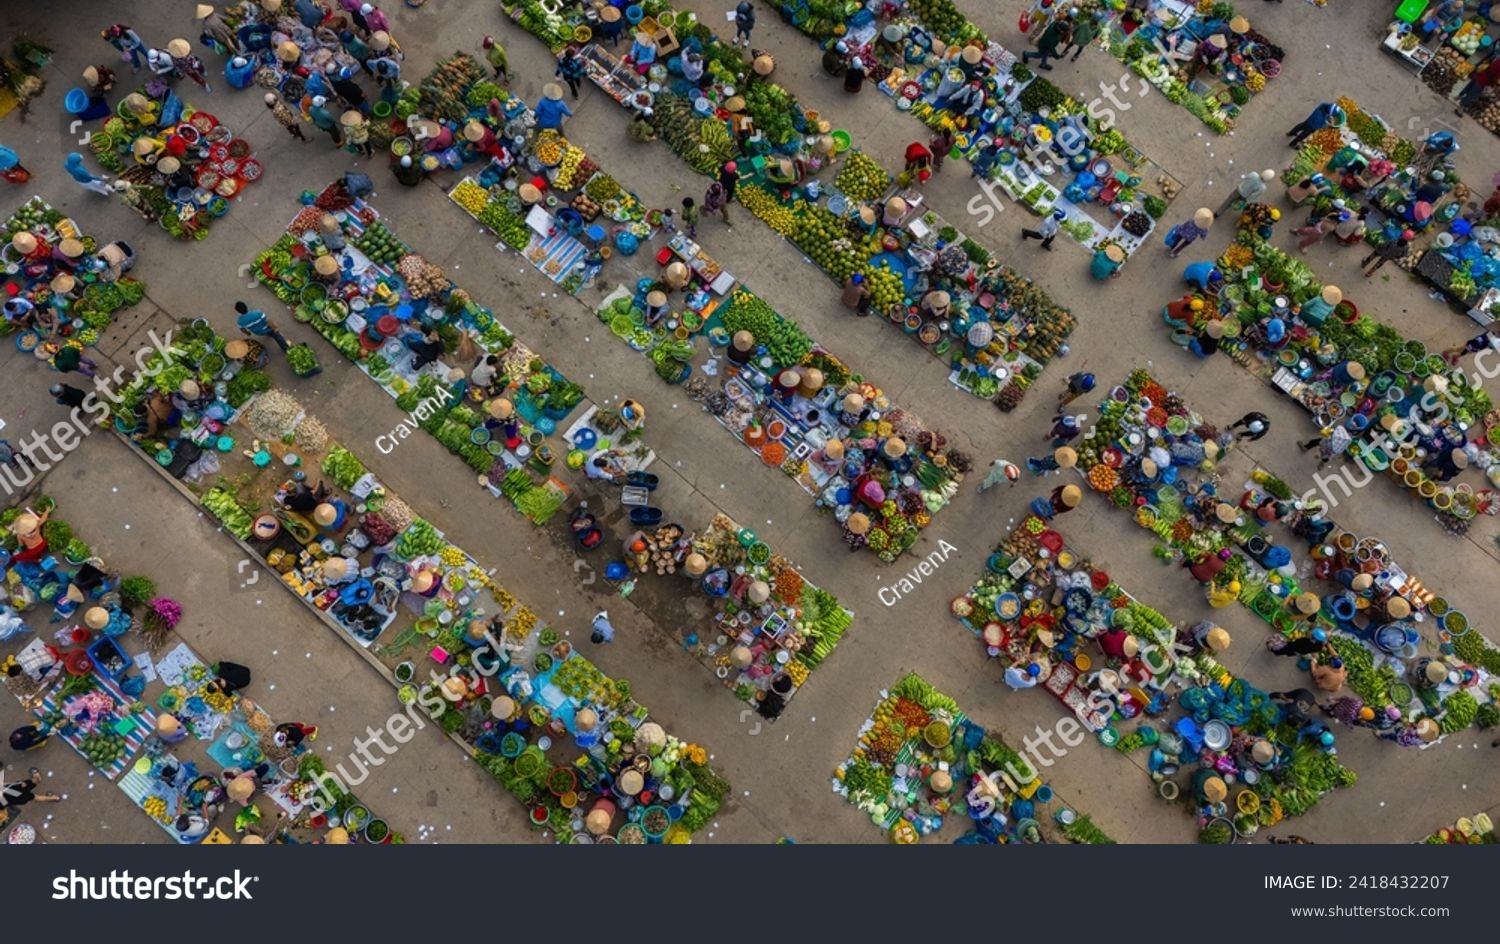 Aerial view of busy local daily life of the morning local market in Vi Thanh or Chom Hom market, Vietnam. People can seen exploring around the market. #2418432207